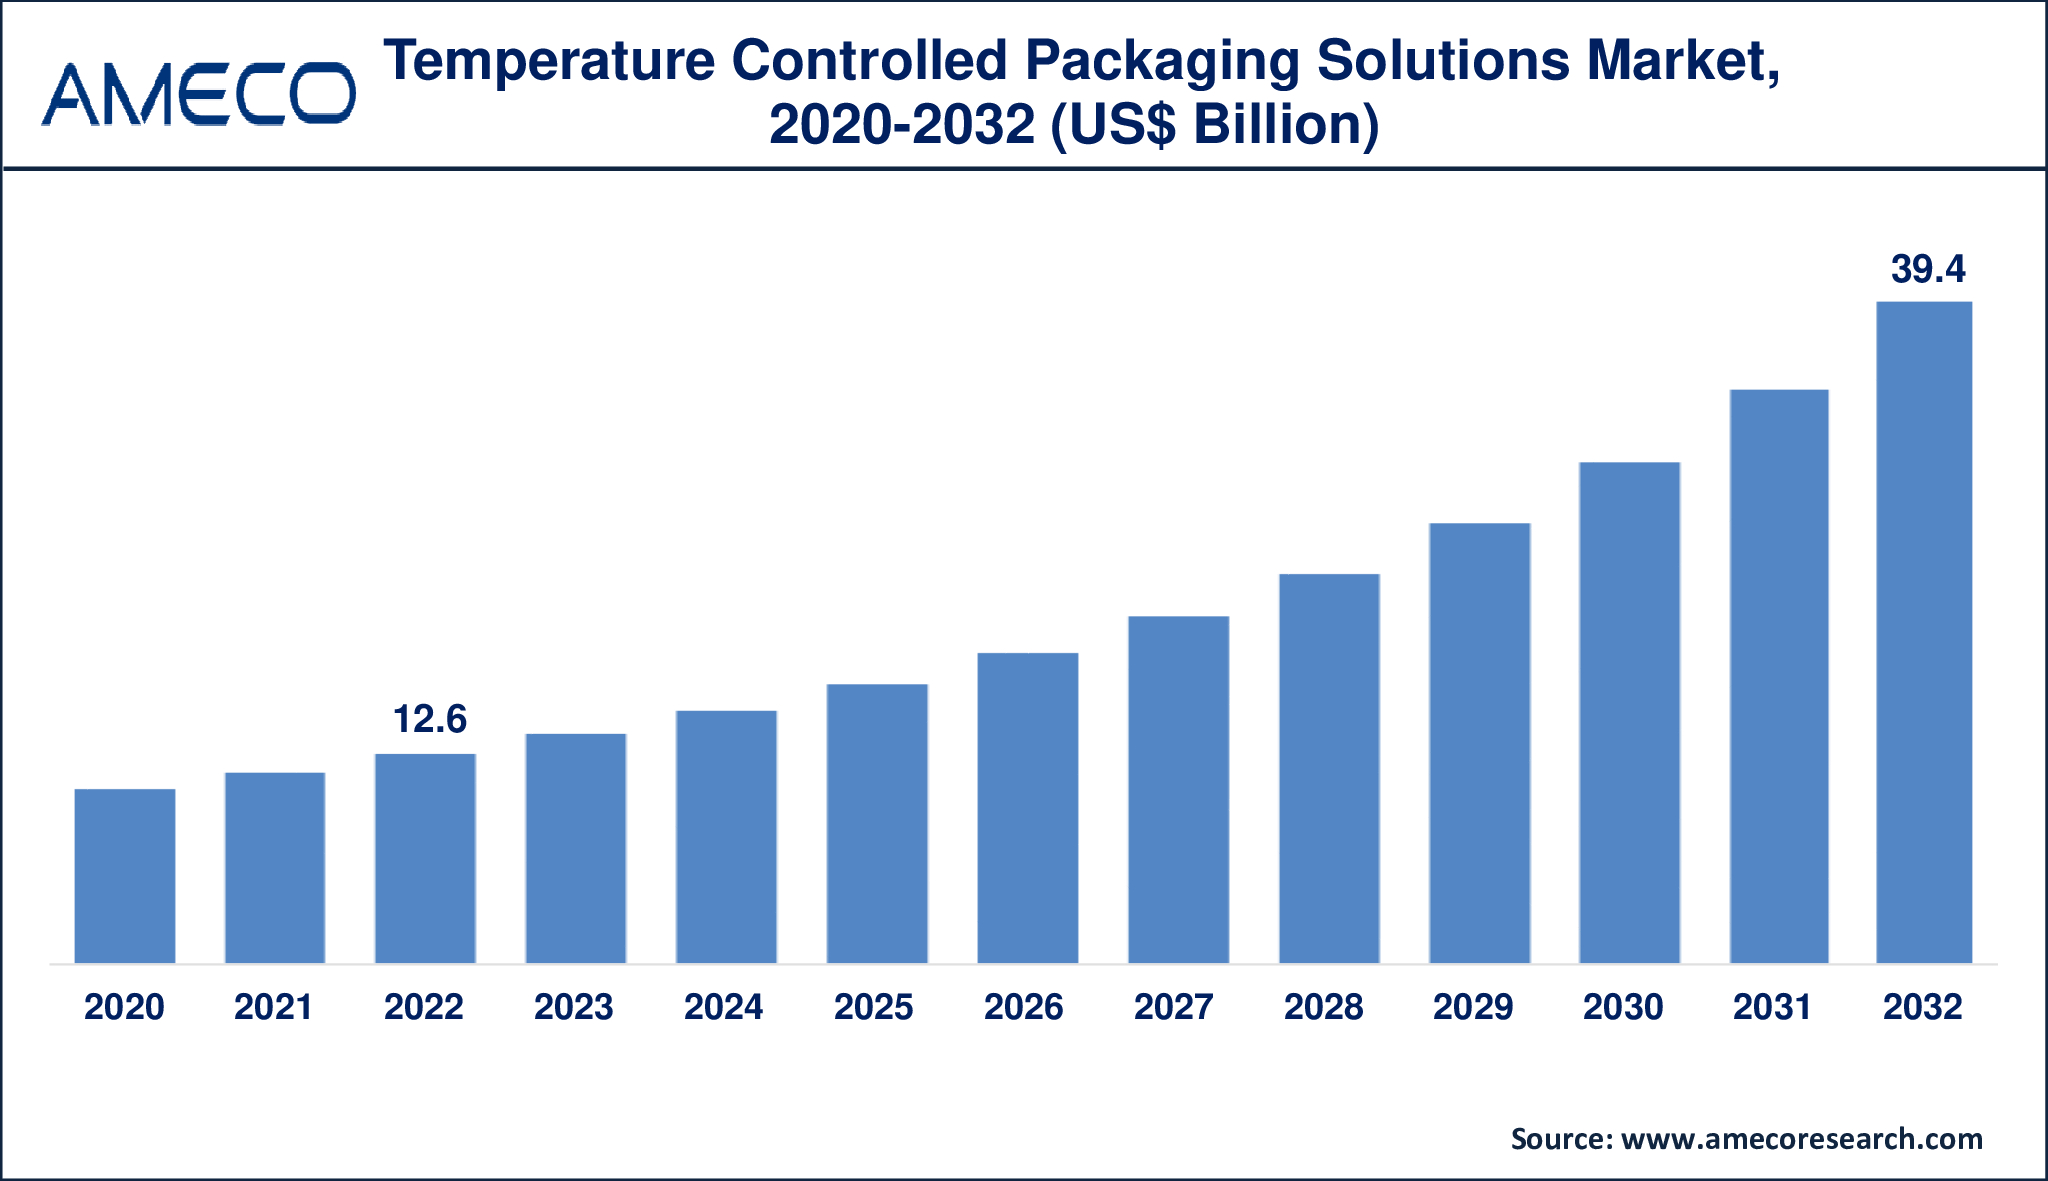 Temperature Controlled Packaging Solutions Market Dynamics